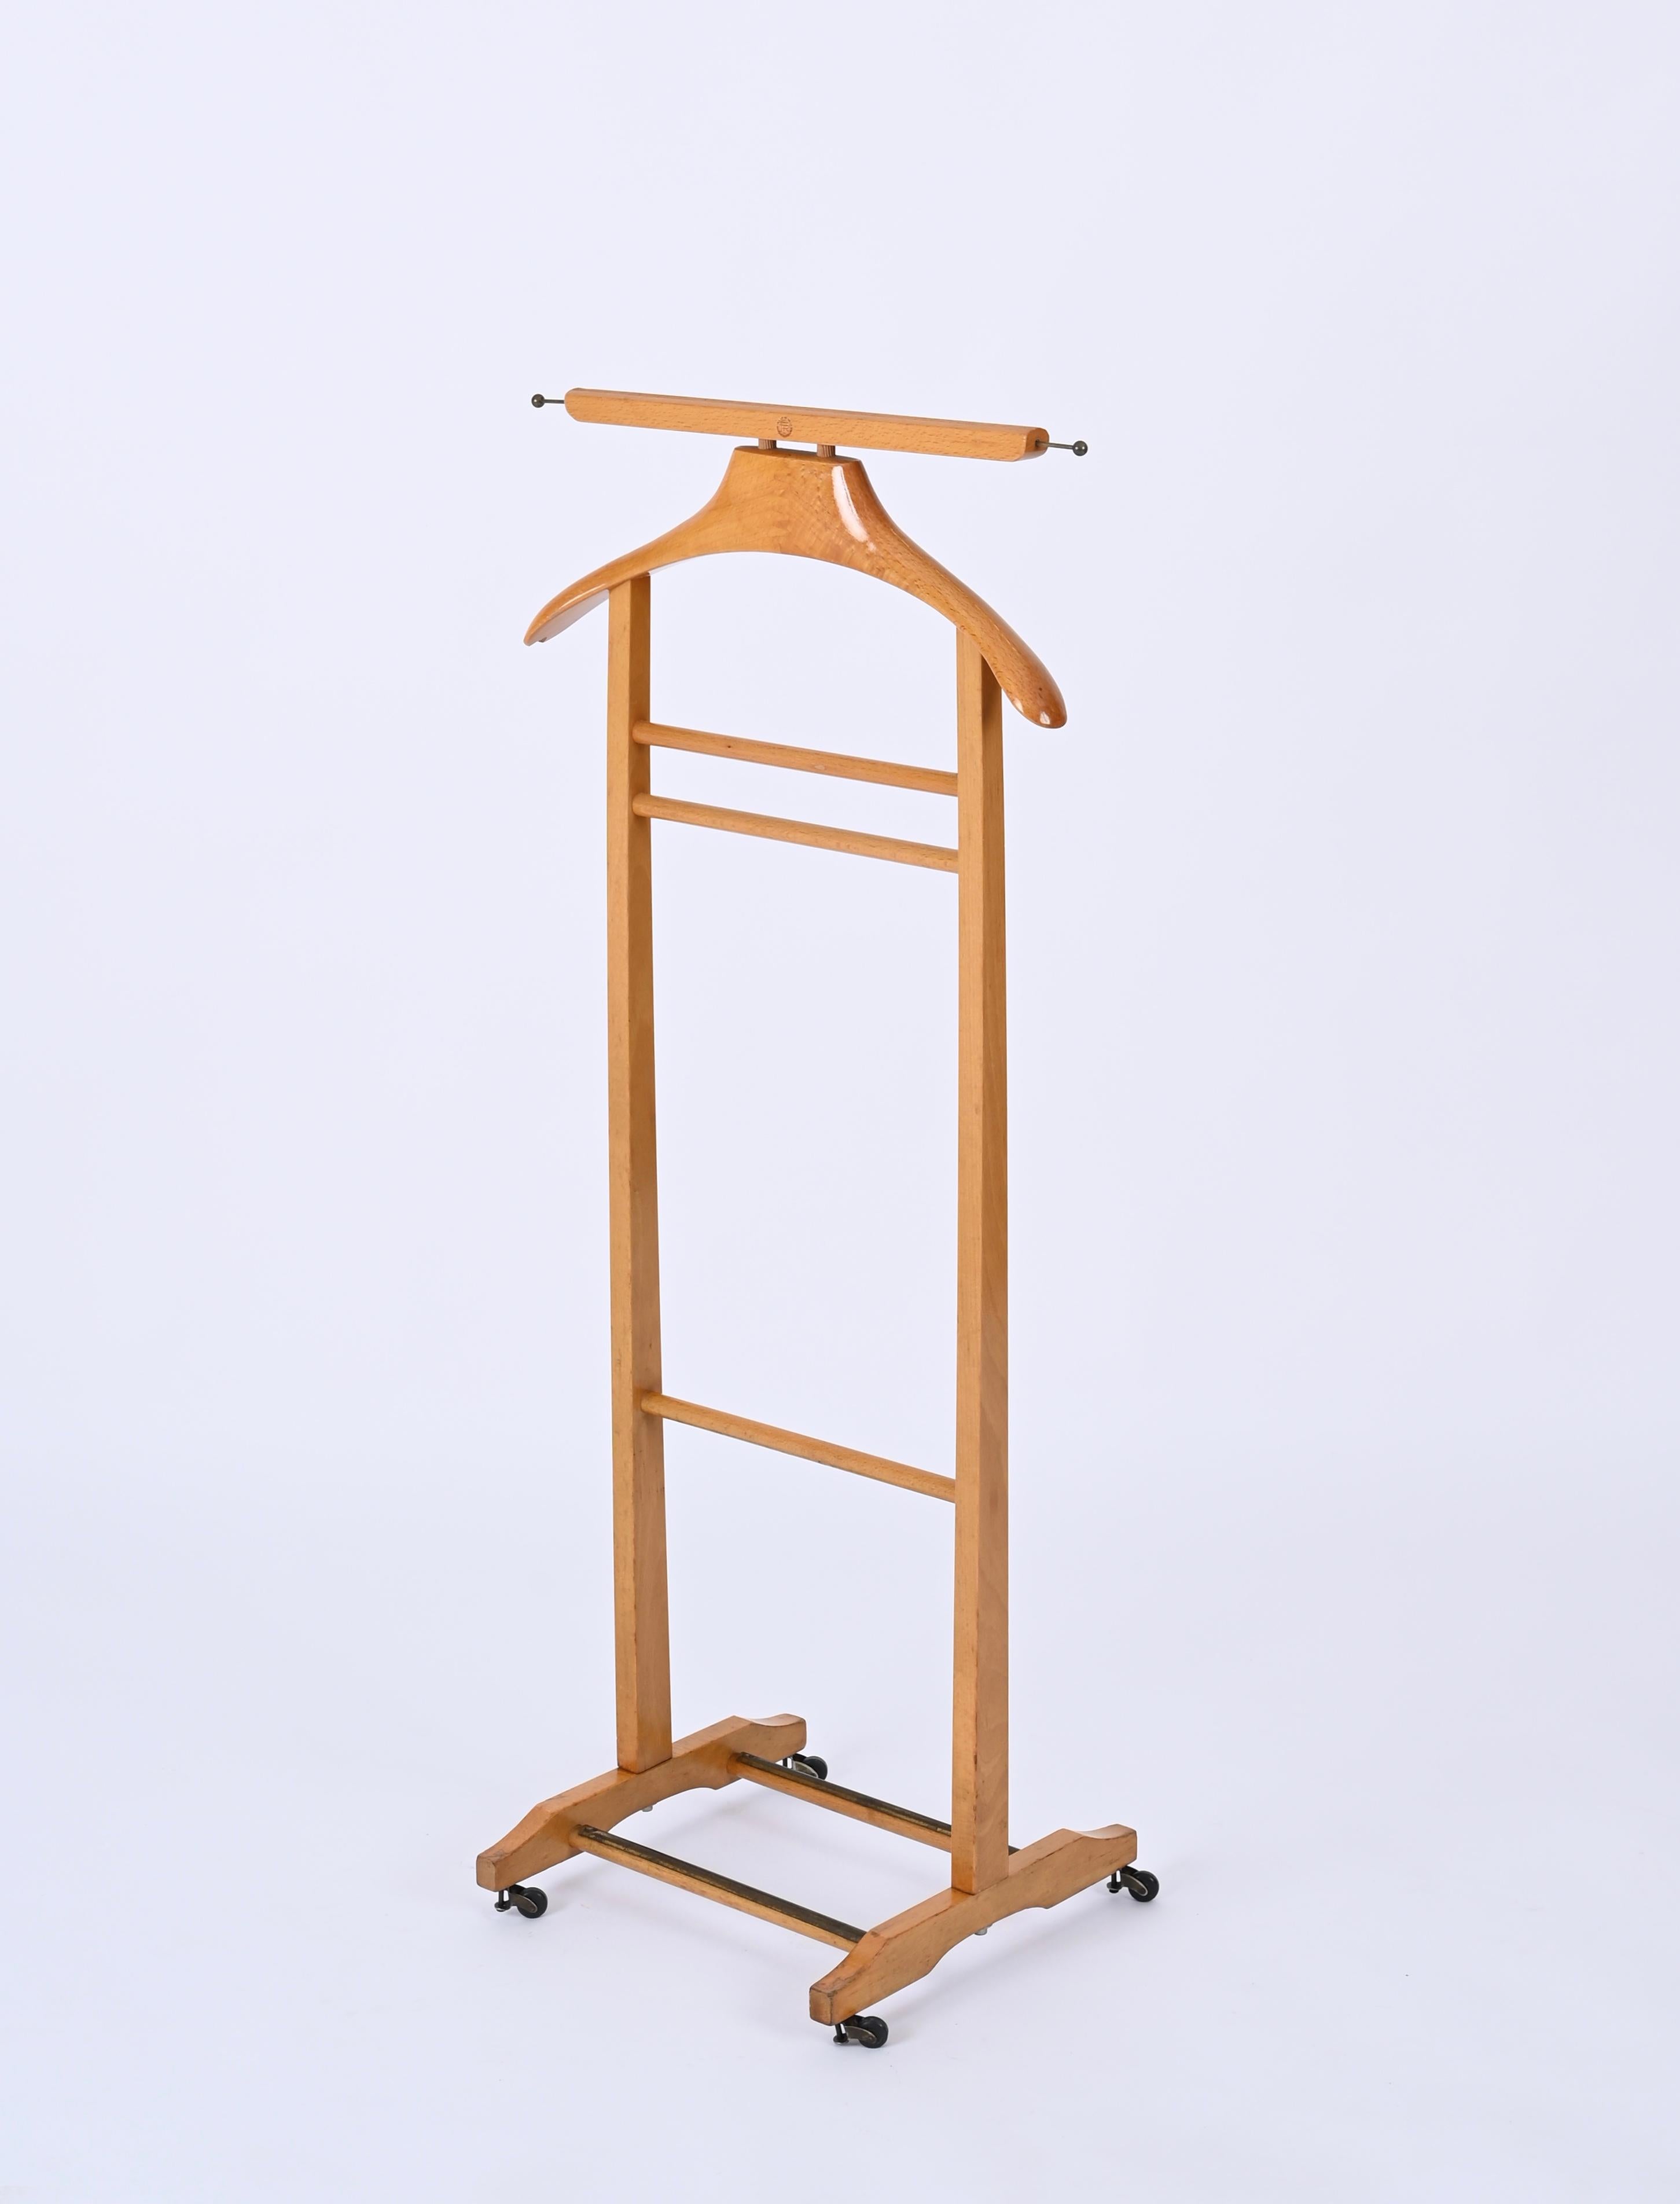 Metal Fratelli Reguitti Midcentury Valet Stand in Beechwood and Brass, Italy, 1960s For Sale